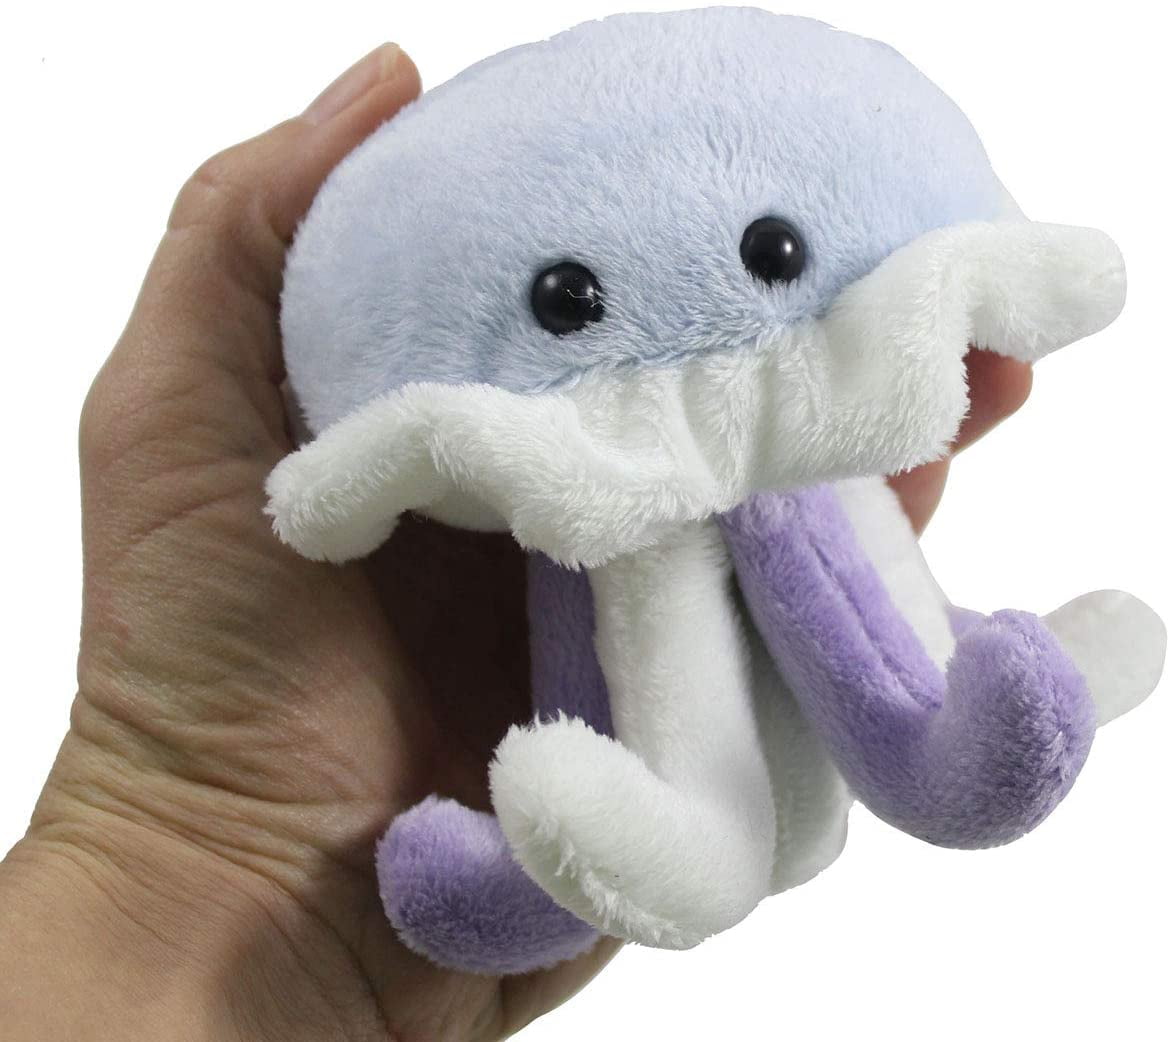 Cuddle Barn Bubbles The Jellyfish Light up Musical Stuffed Animal 12in Plush Toy for sale online 